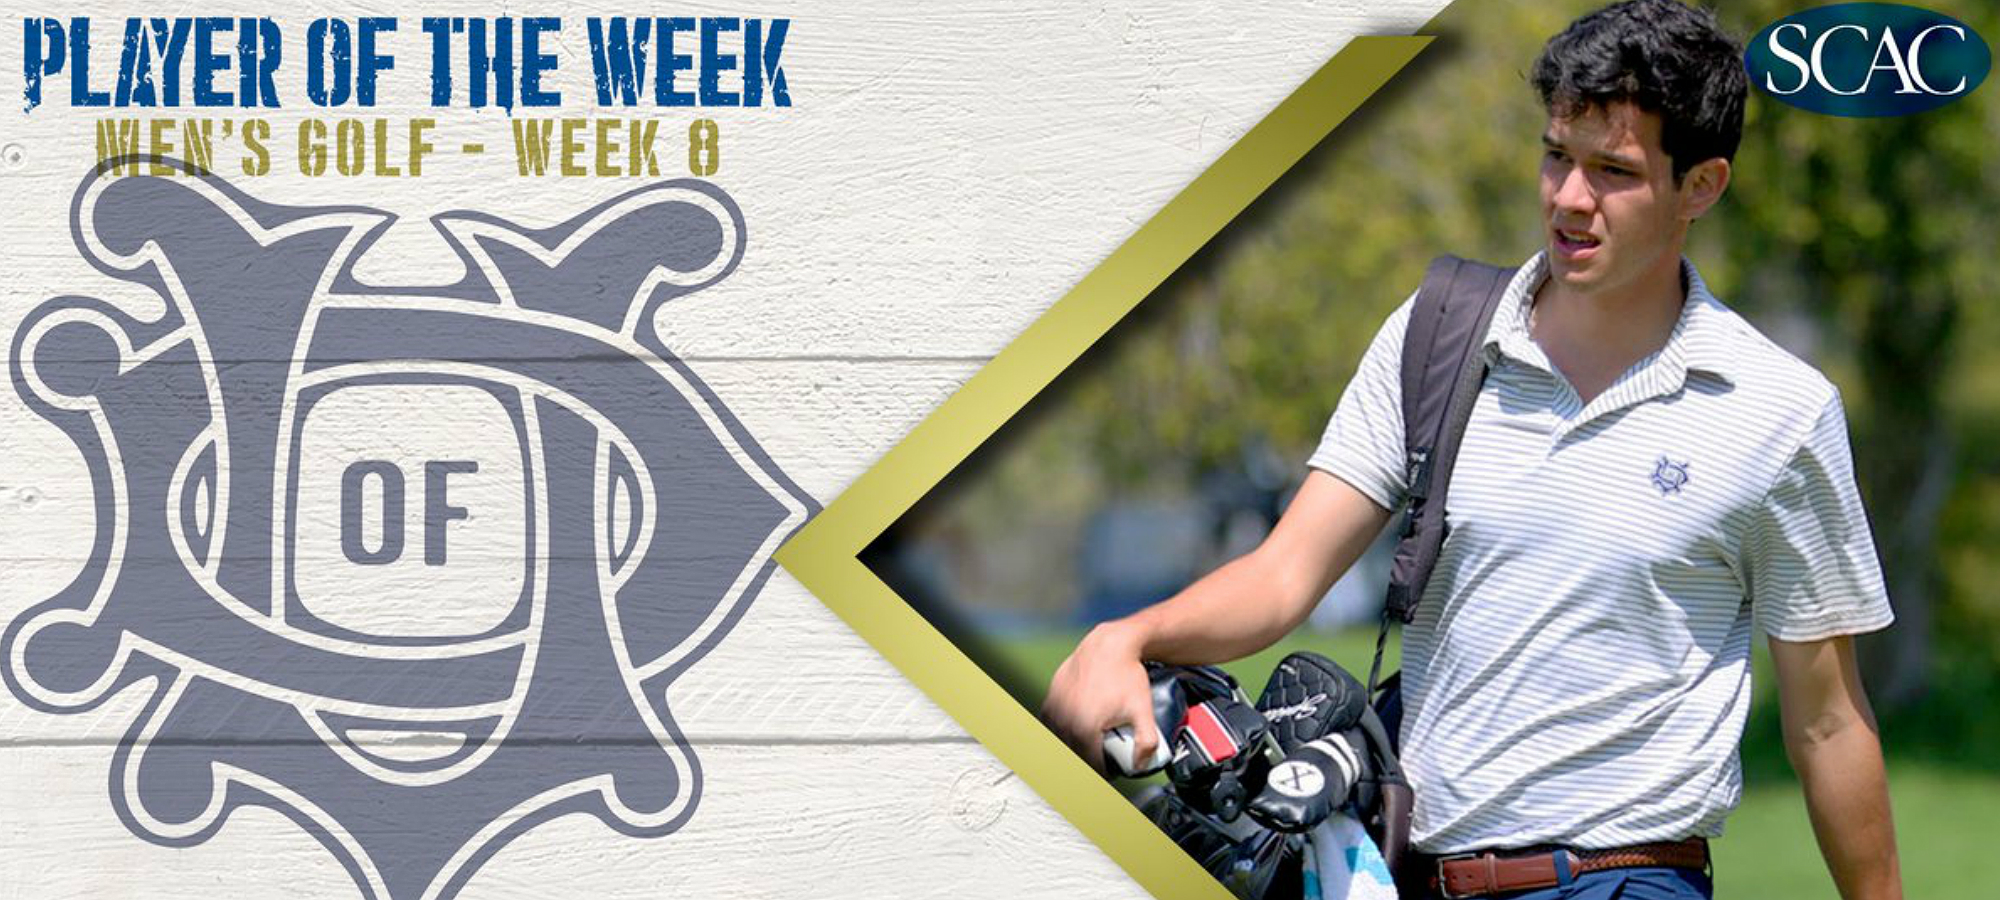 Montalvo Captured SCAC Men's Golfer of the Week after Great Performance